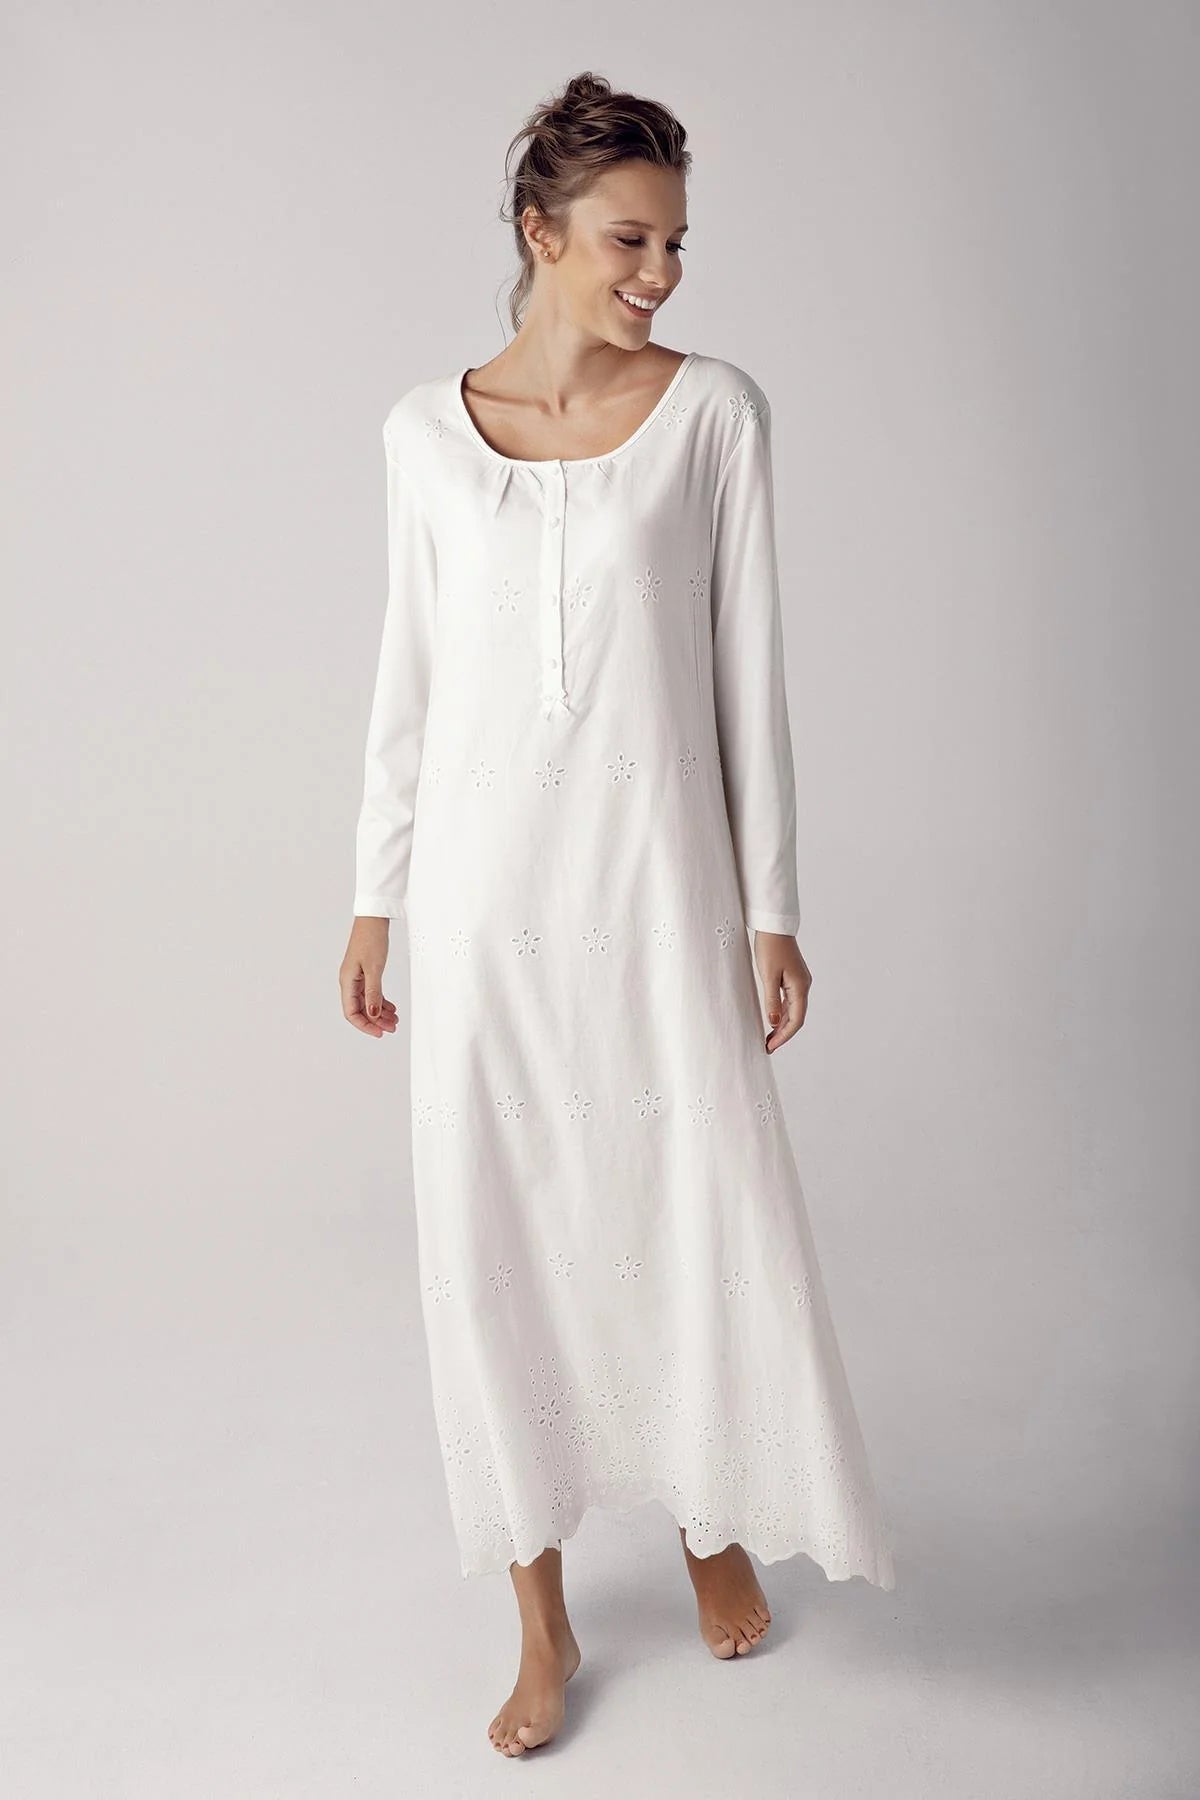 Shopymommy 11401 Woven Long Maternity & Nursing Nightgown With Robe Ecru